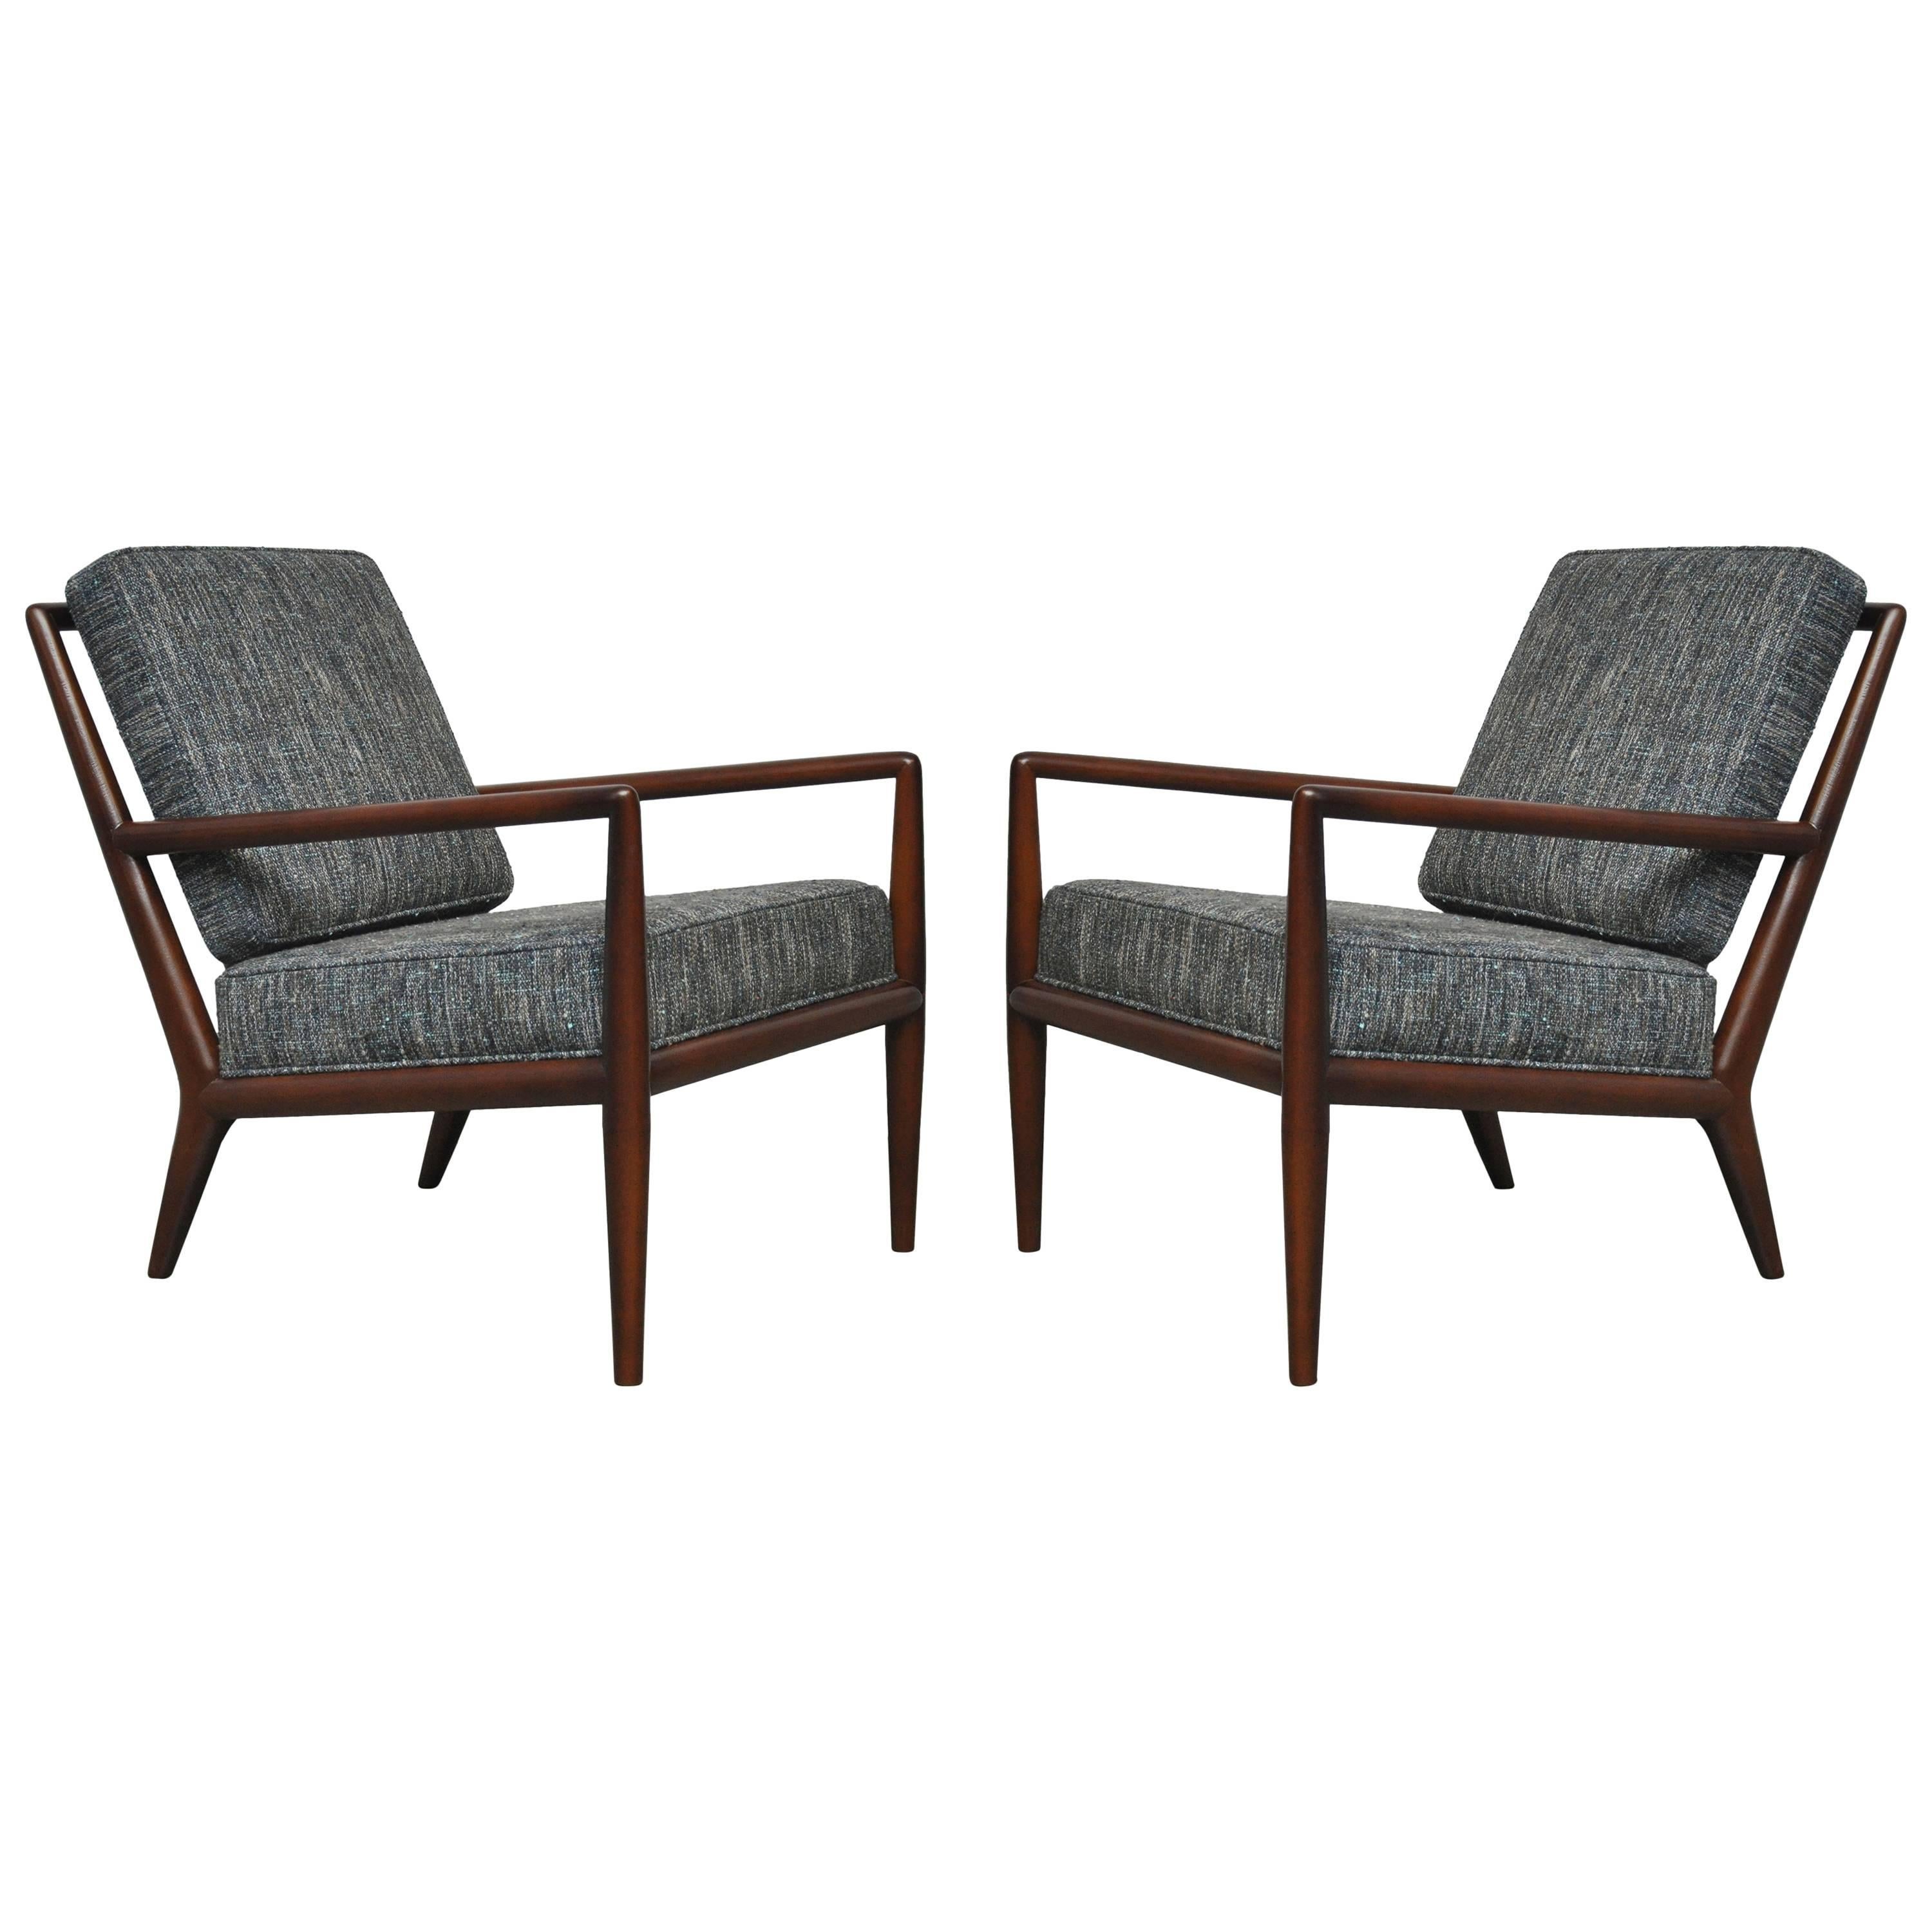 T.H. Robsjohn-Gibbings Pair of Lounge Chairs with Blue Upholstery